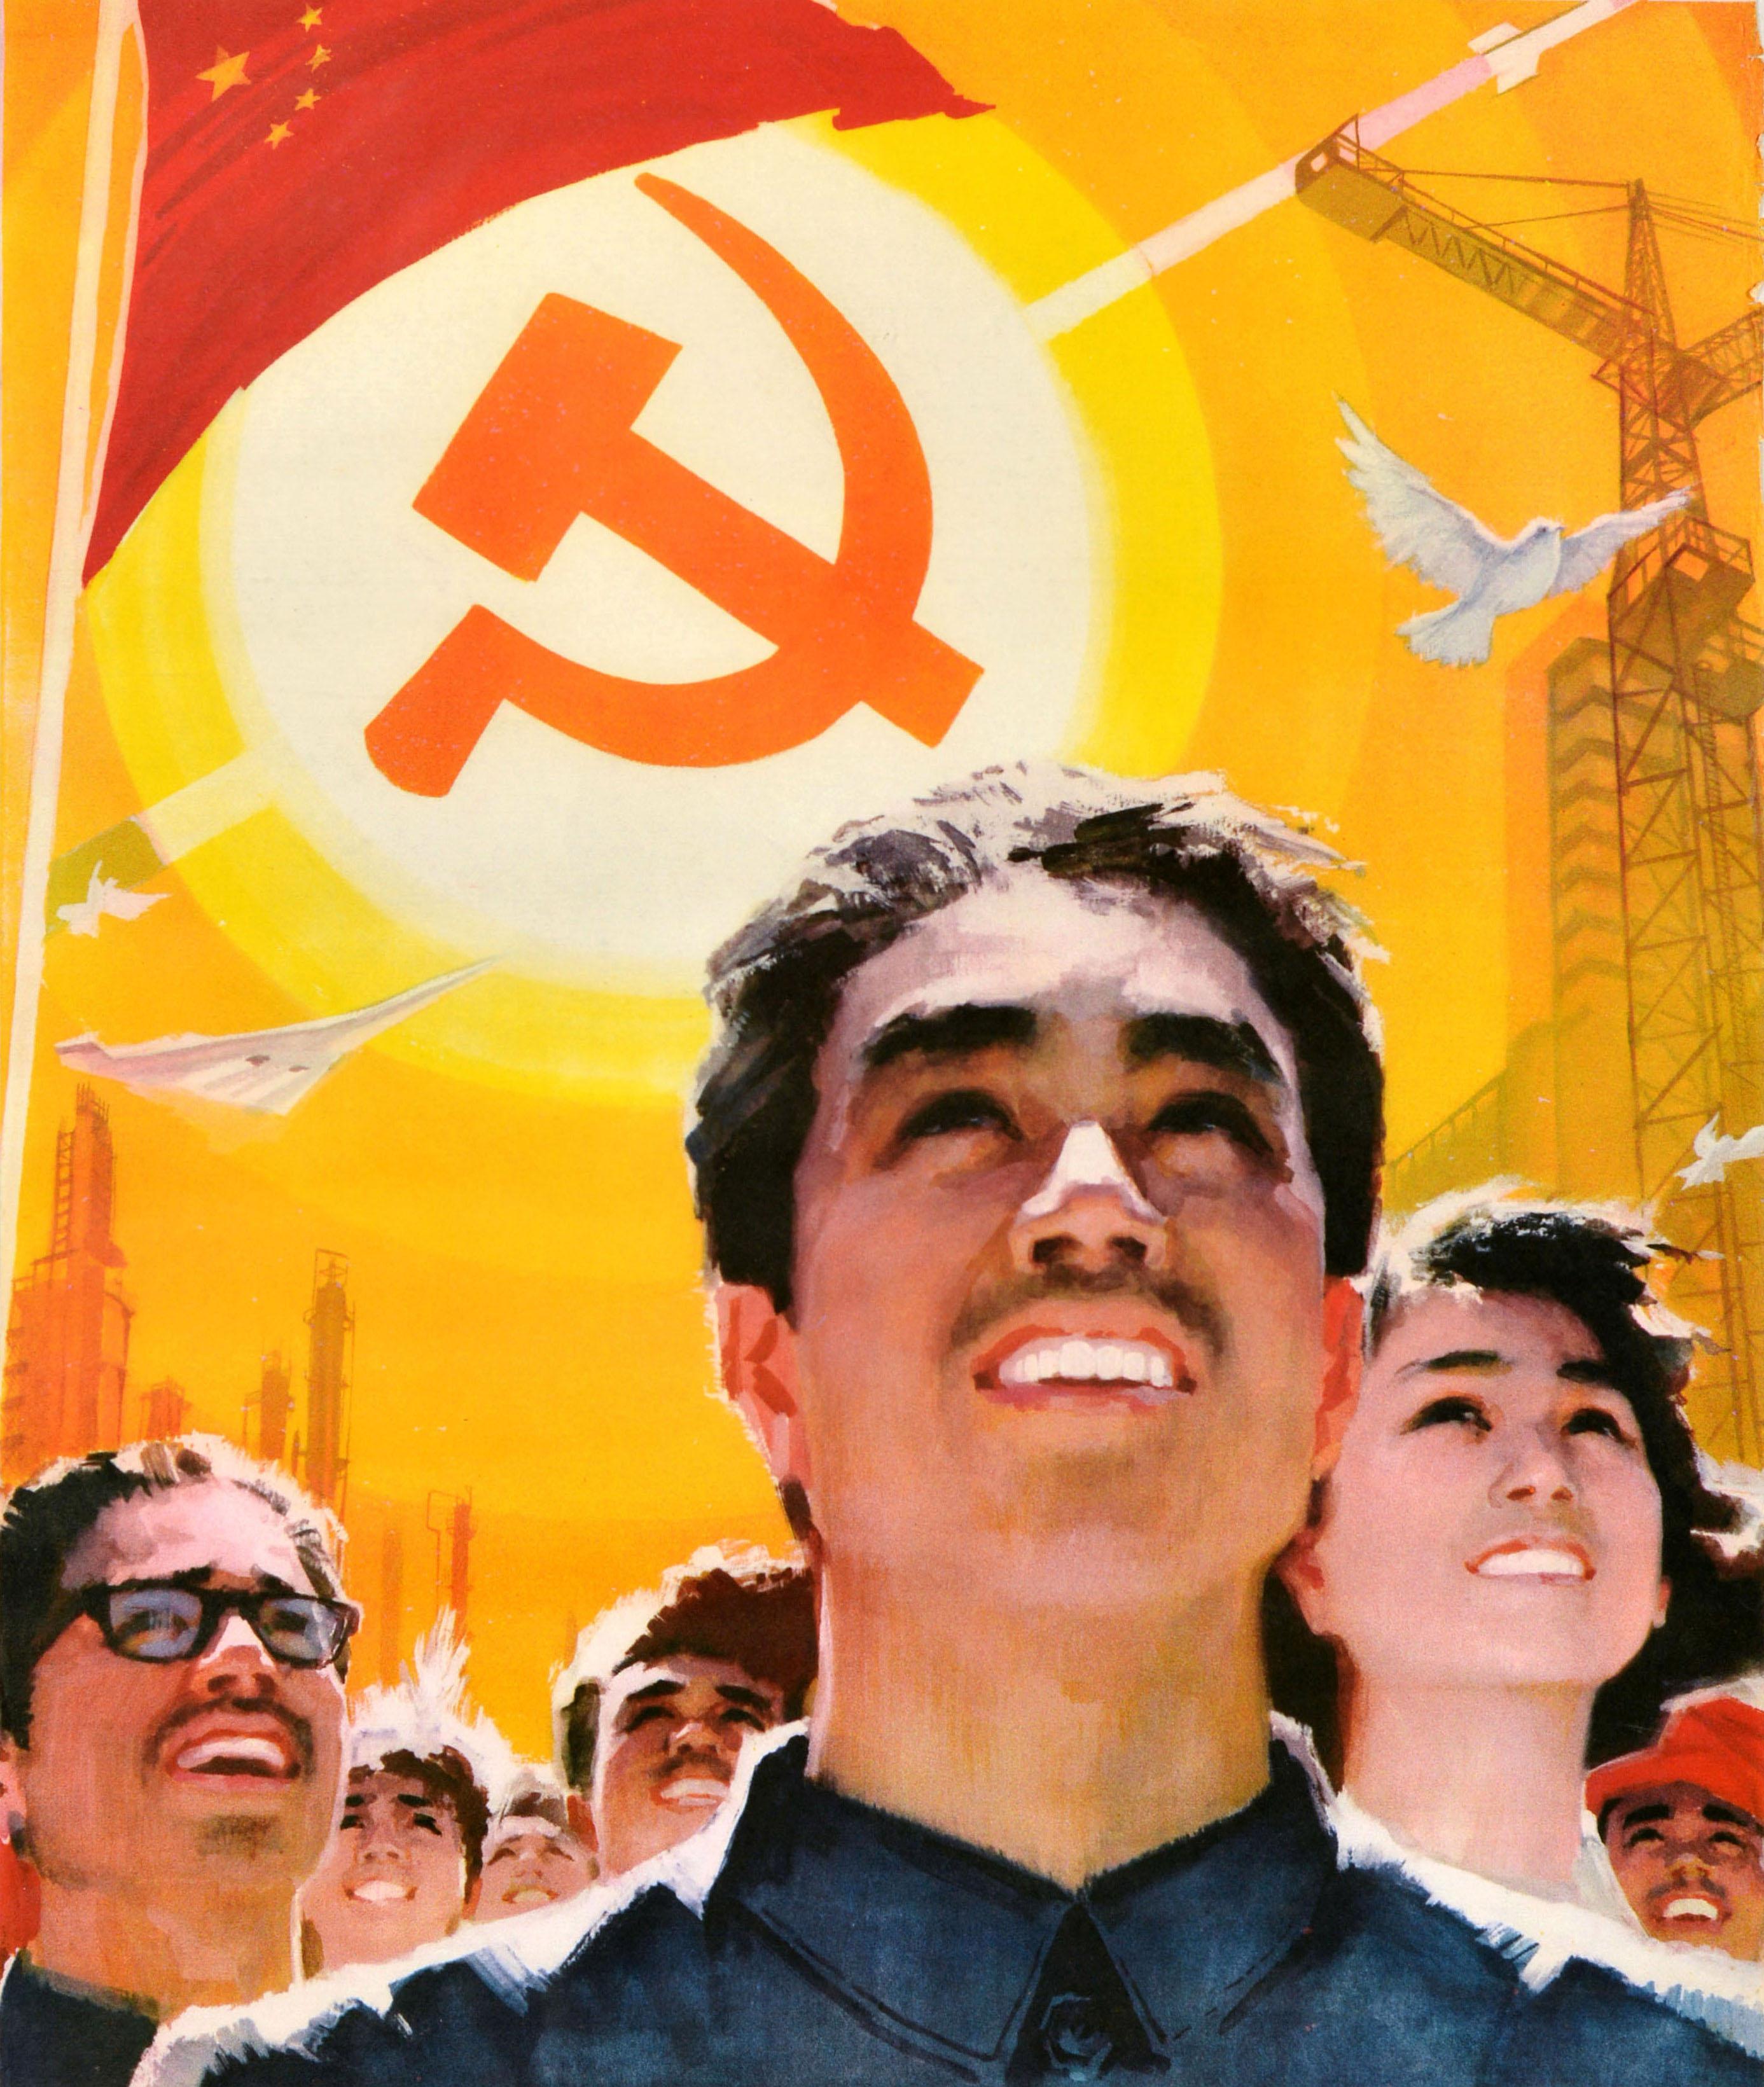 Original vintage Chinese Communist Party propaganda poster - Our flag is communism Celebrate the convening of the 12th National Congress of the Communist Party of China / 我们的旗帜是共产主义。庆祝中国共产党第十二次全国代表大会召开 - featuring an illustration of smiling young